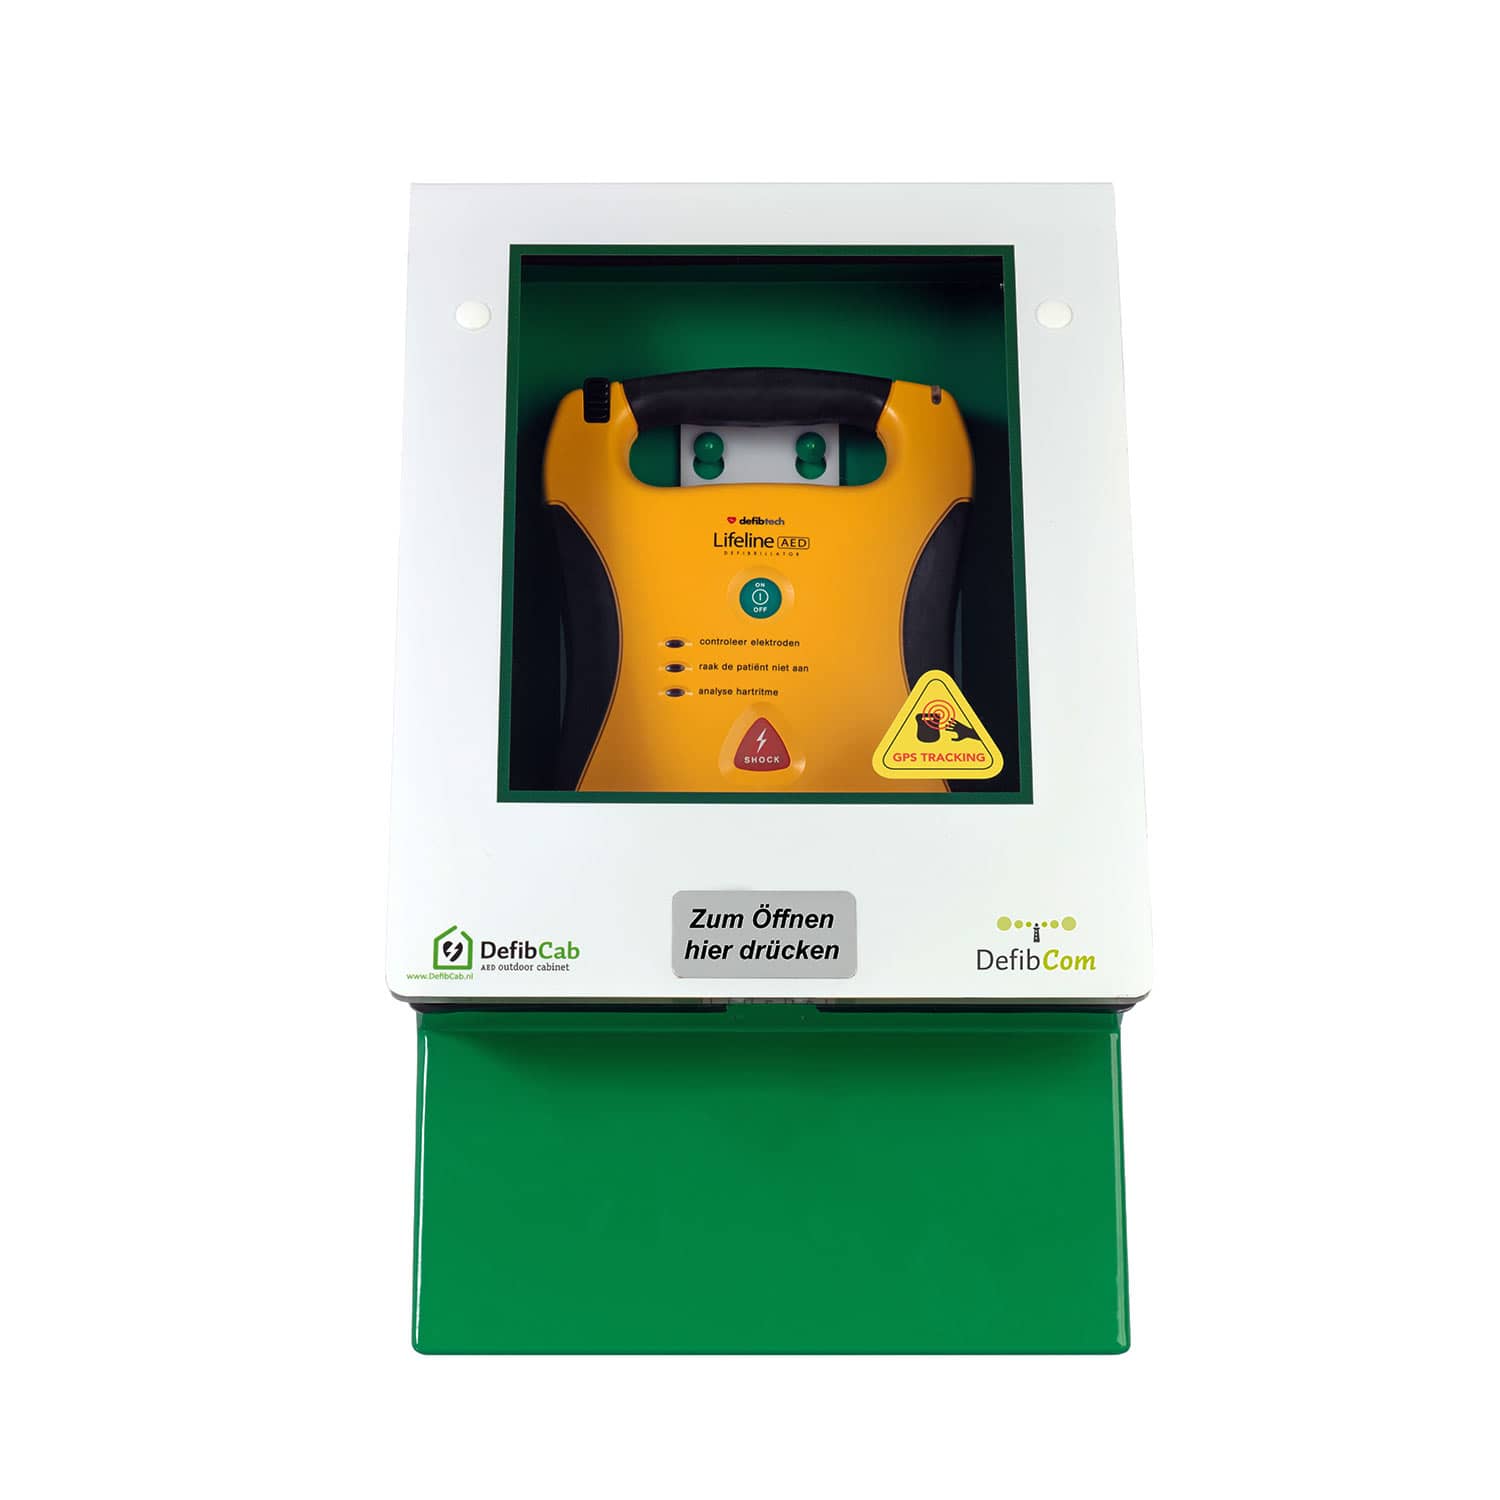 Defibcab Smart Monitoring Aed Cabinet Available In Different Variants